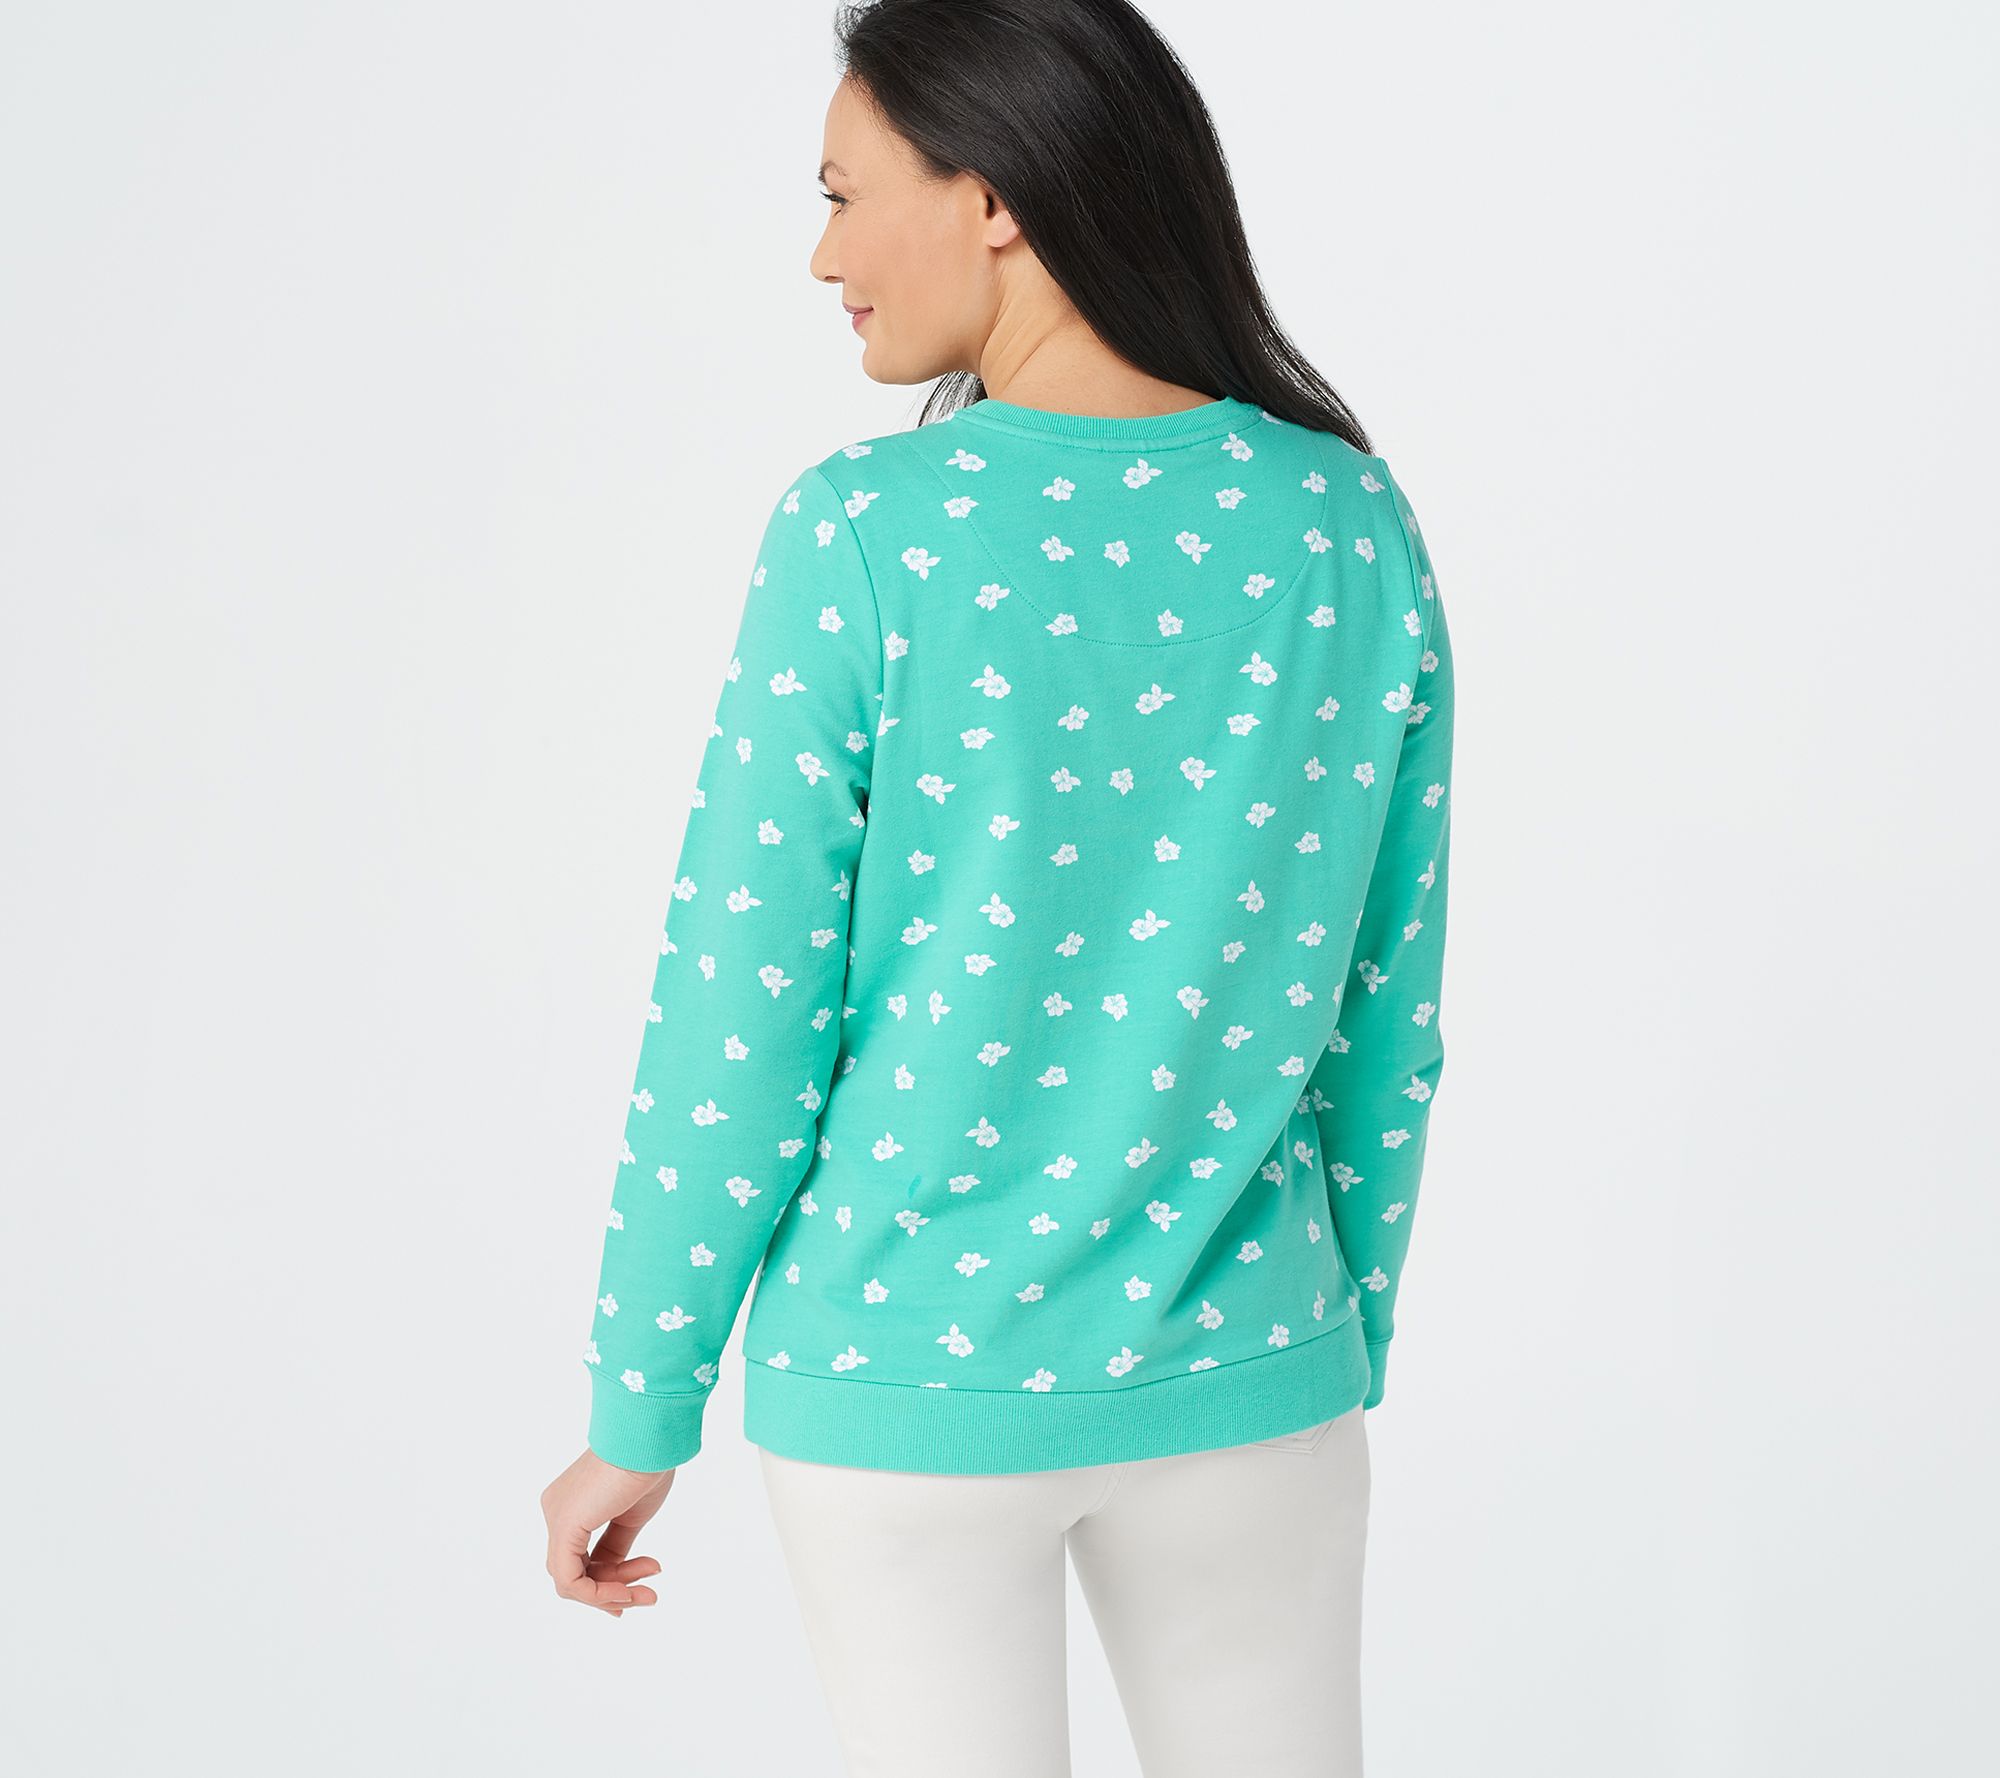 Denim & Co. Printed French Terry Crew Neck Top 